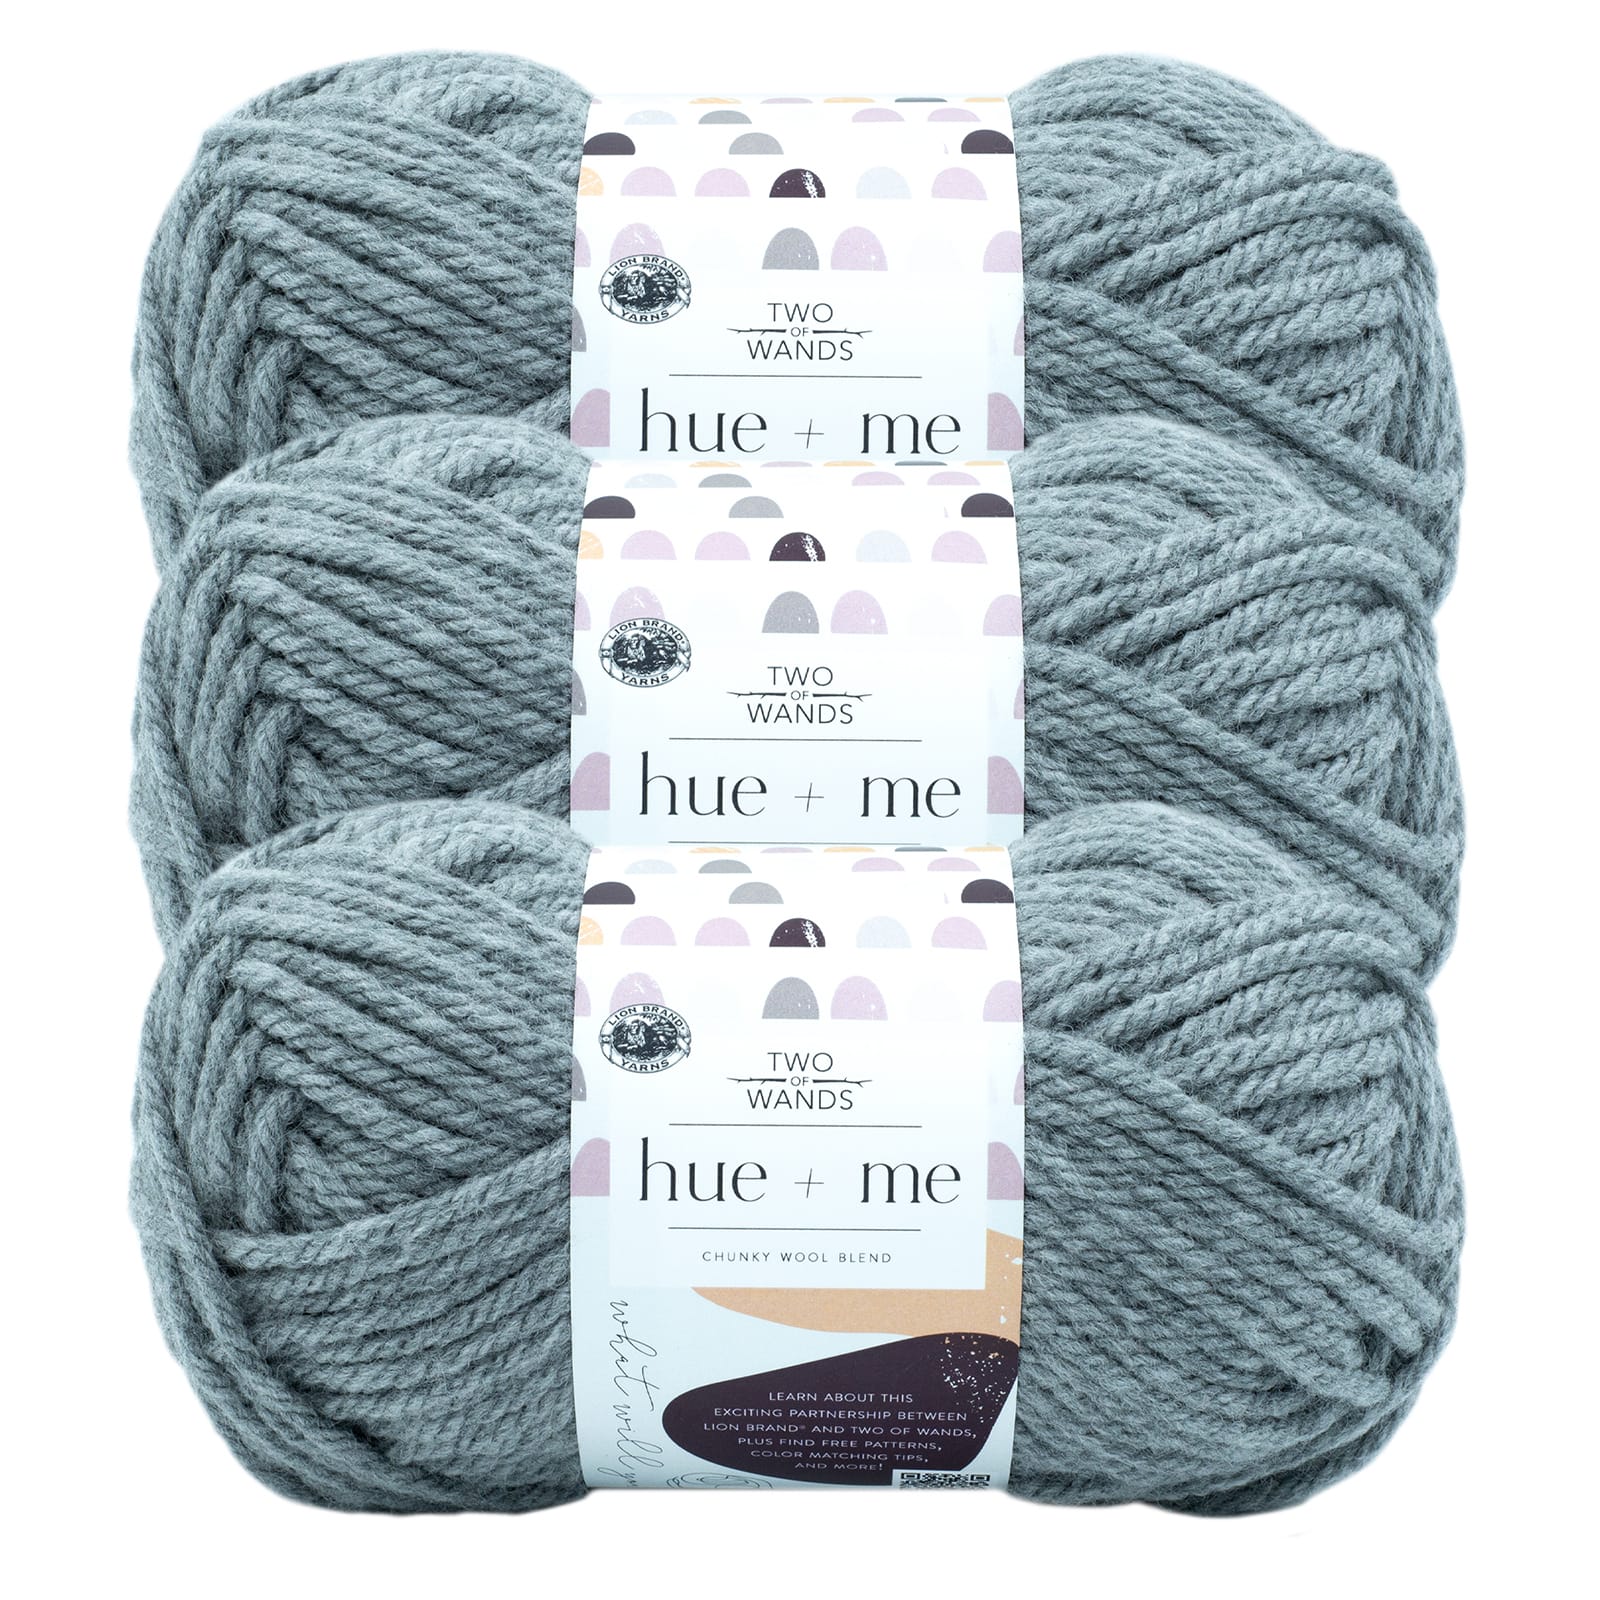 Lion Brand Yarn Two of Wands Hue & Me Cement Wool Blend Bulky Acrylic, Wool Gray Yarn 3 Pack